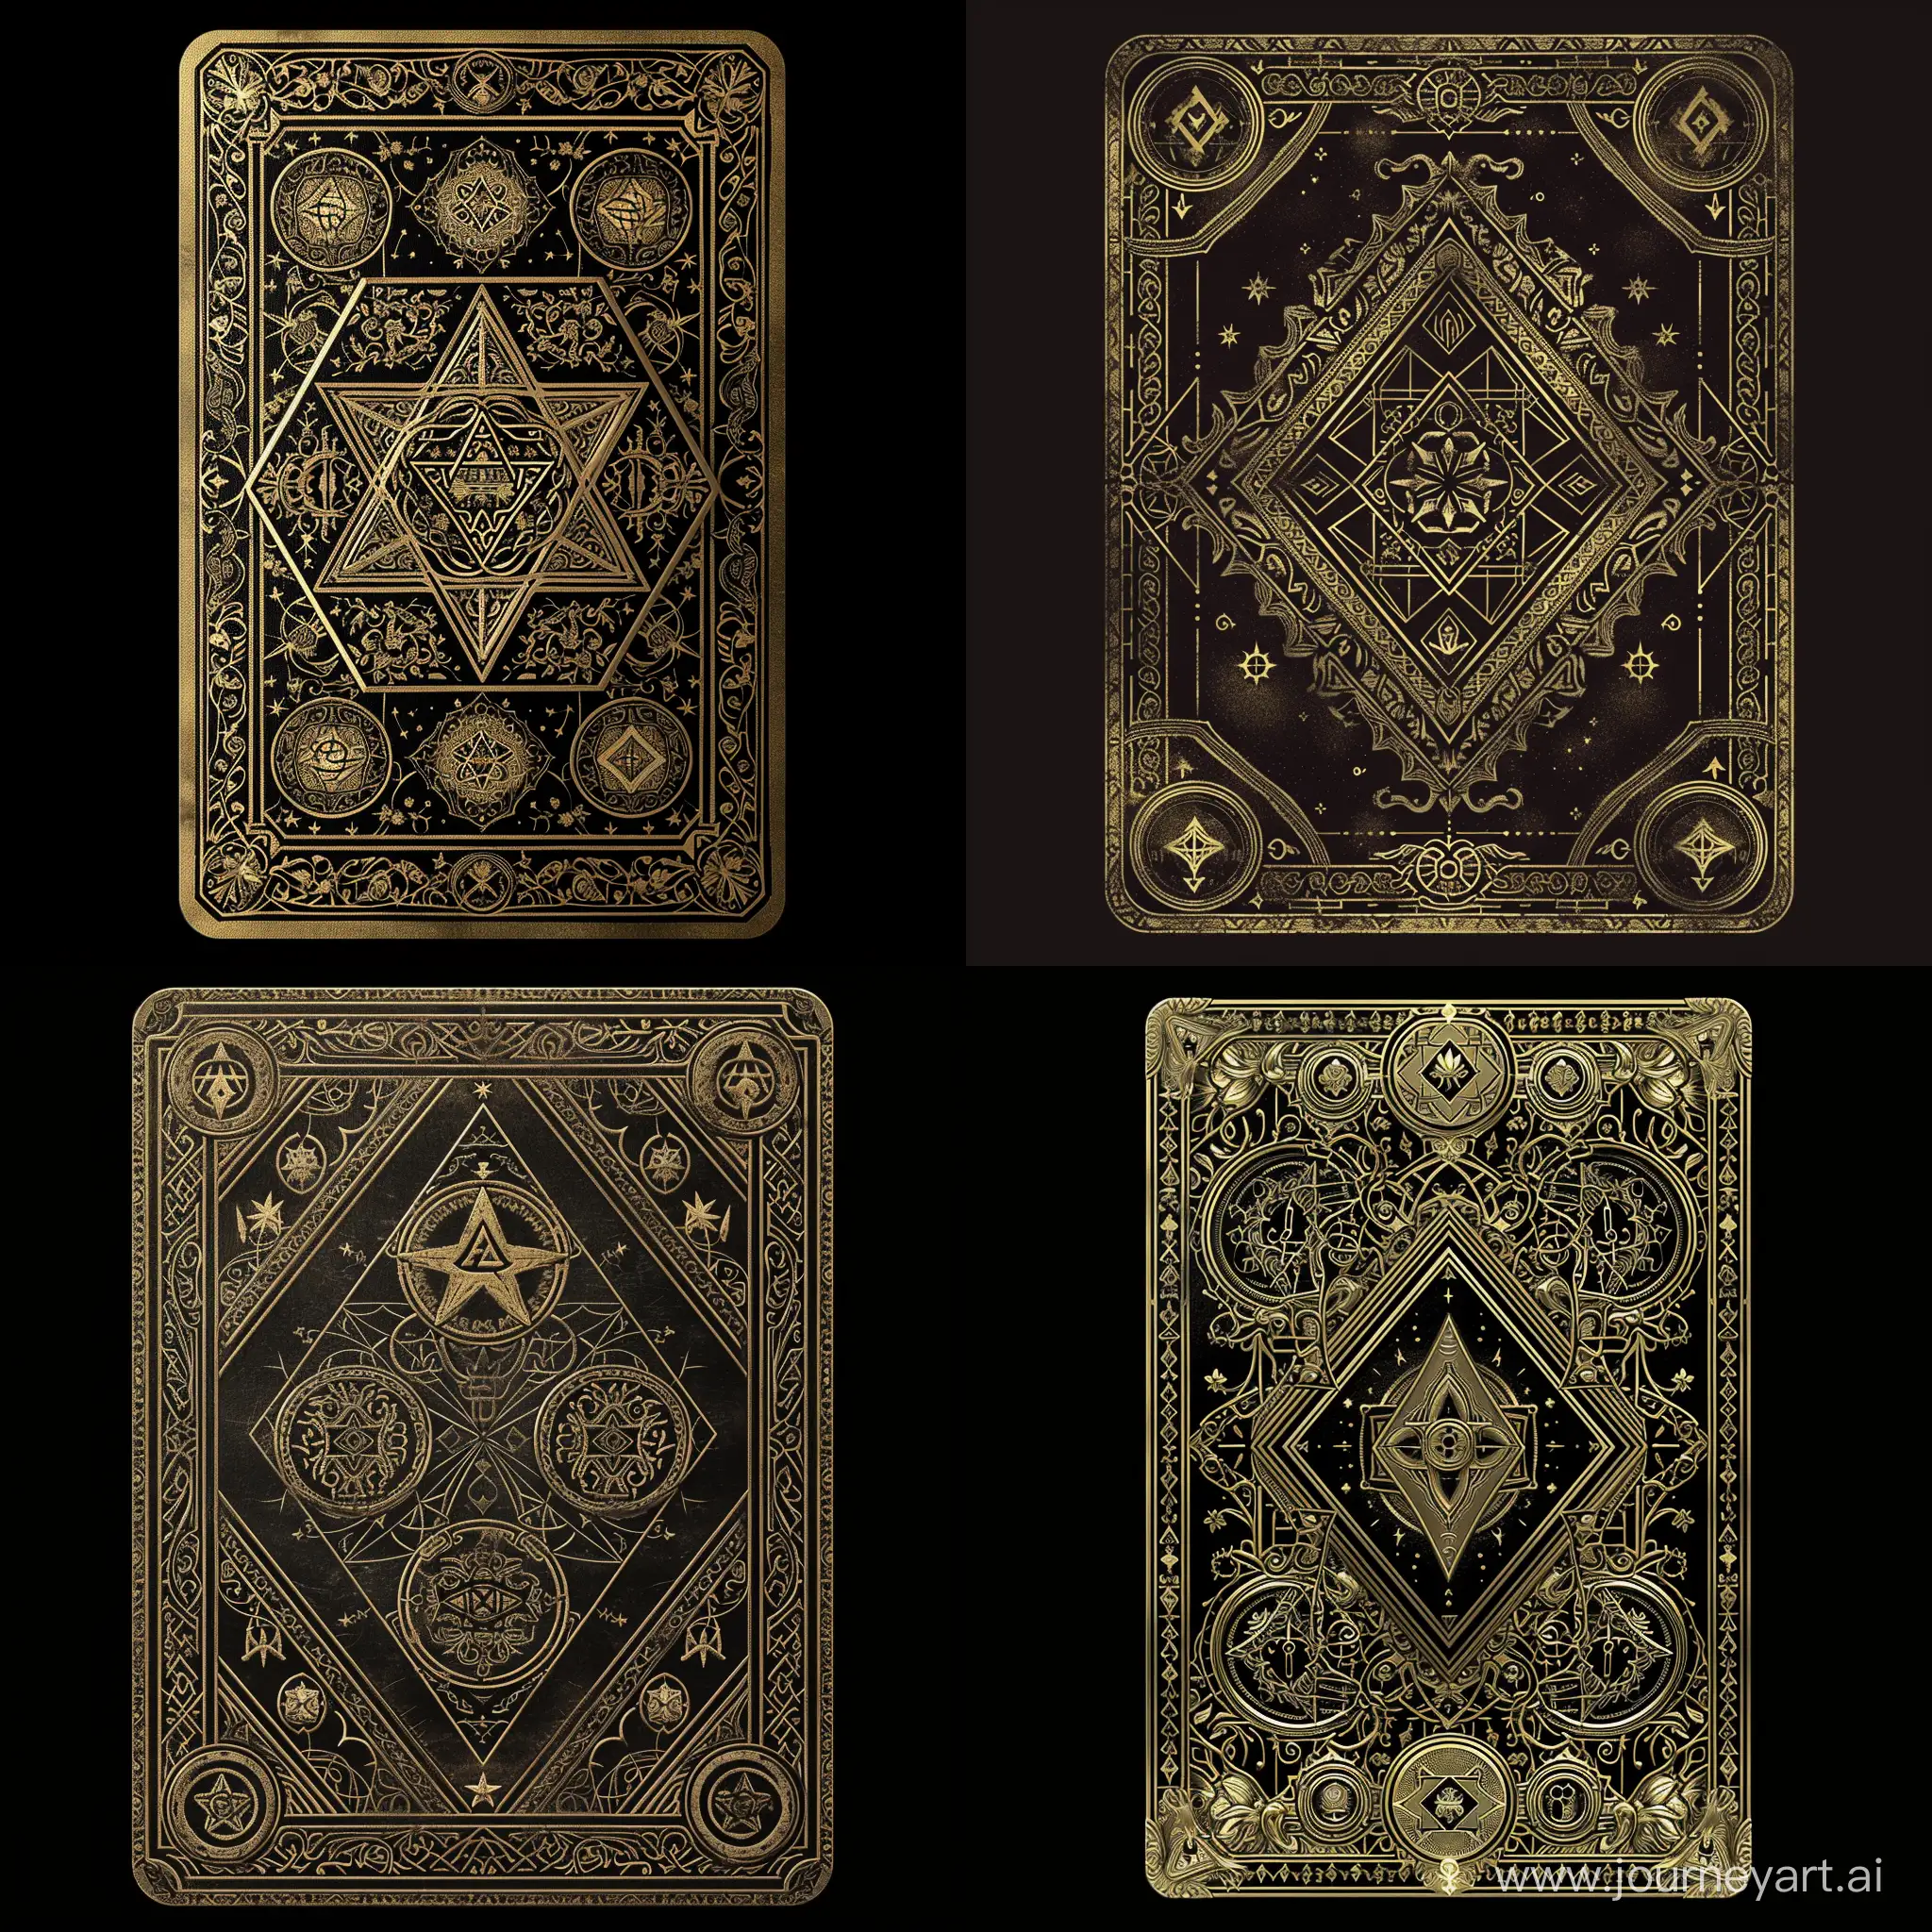 a playing card back that is detailed and ornate metallic object, possibly a book cover or a panel. It’s adorned with intricate designs and symbols. The object is rectangular with rounded corners and seems to be made of metal, featuring an elaborate embossed design. The dark background with golden designs creates a stark contrast.  The design includes various geometric shapes, such as circles and triangles. A prominent triangle in the center contains another inverted triangle inside it, both lined with intricate patterns. Four circular designs surround the central triangle, each enclosing different symbolic elements like stars or floral patterns. The entire piece is bordered by an ornate rectangular frame filled with detailed patterns, giving it an antique look--ar 530:1000